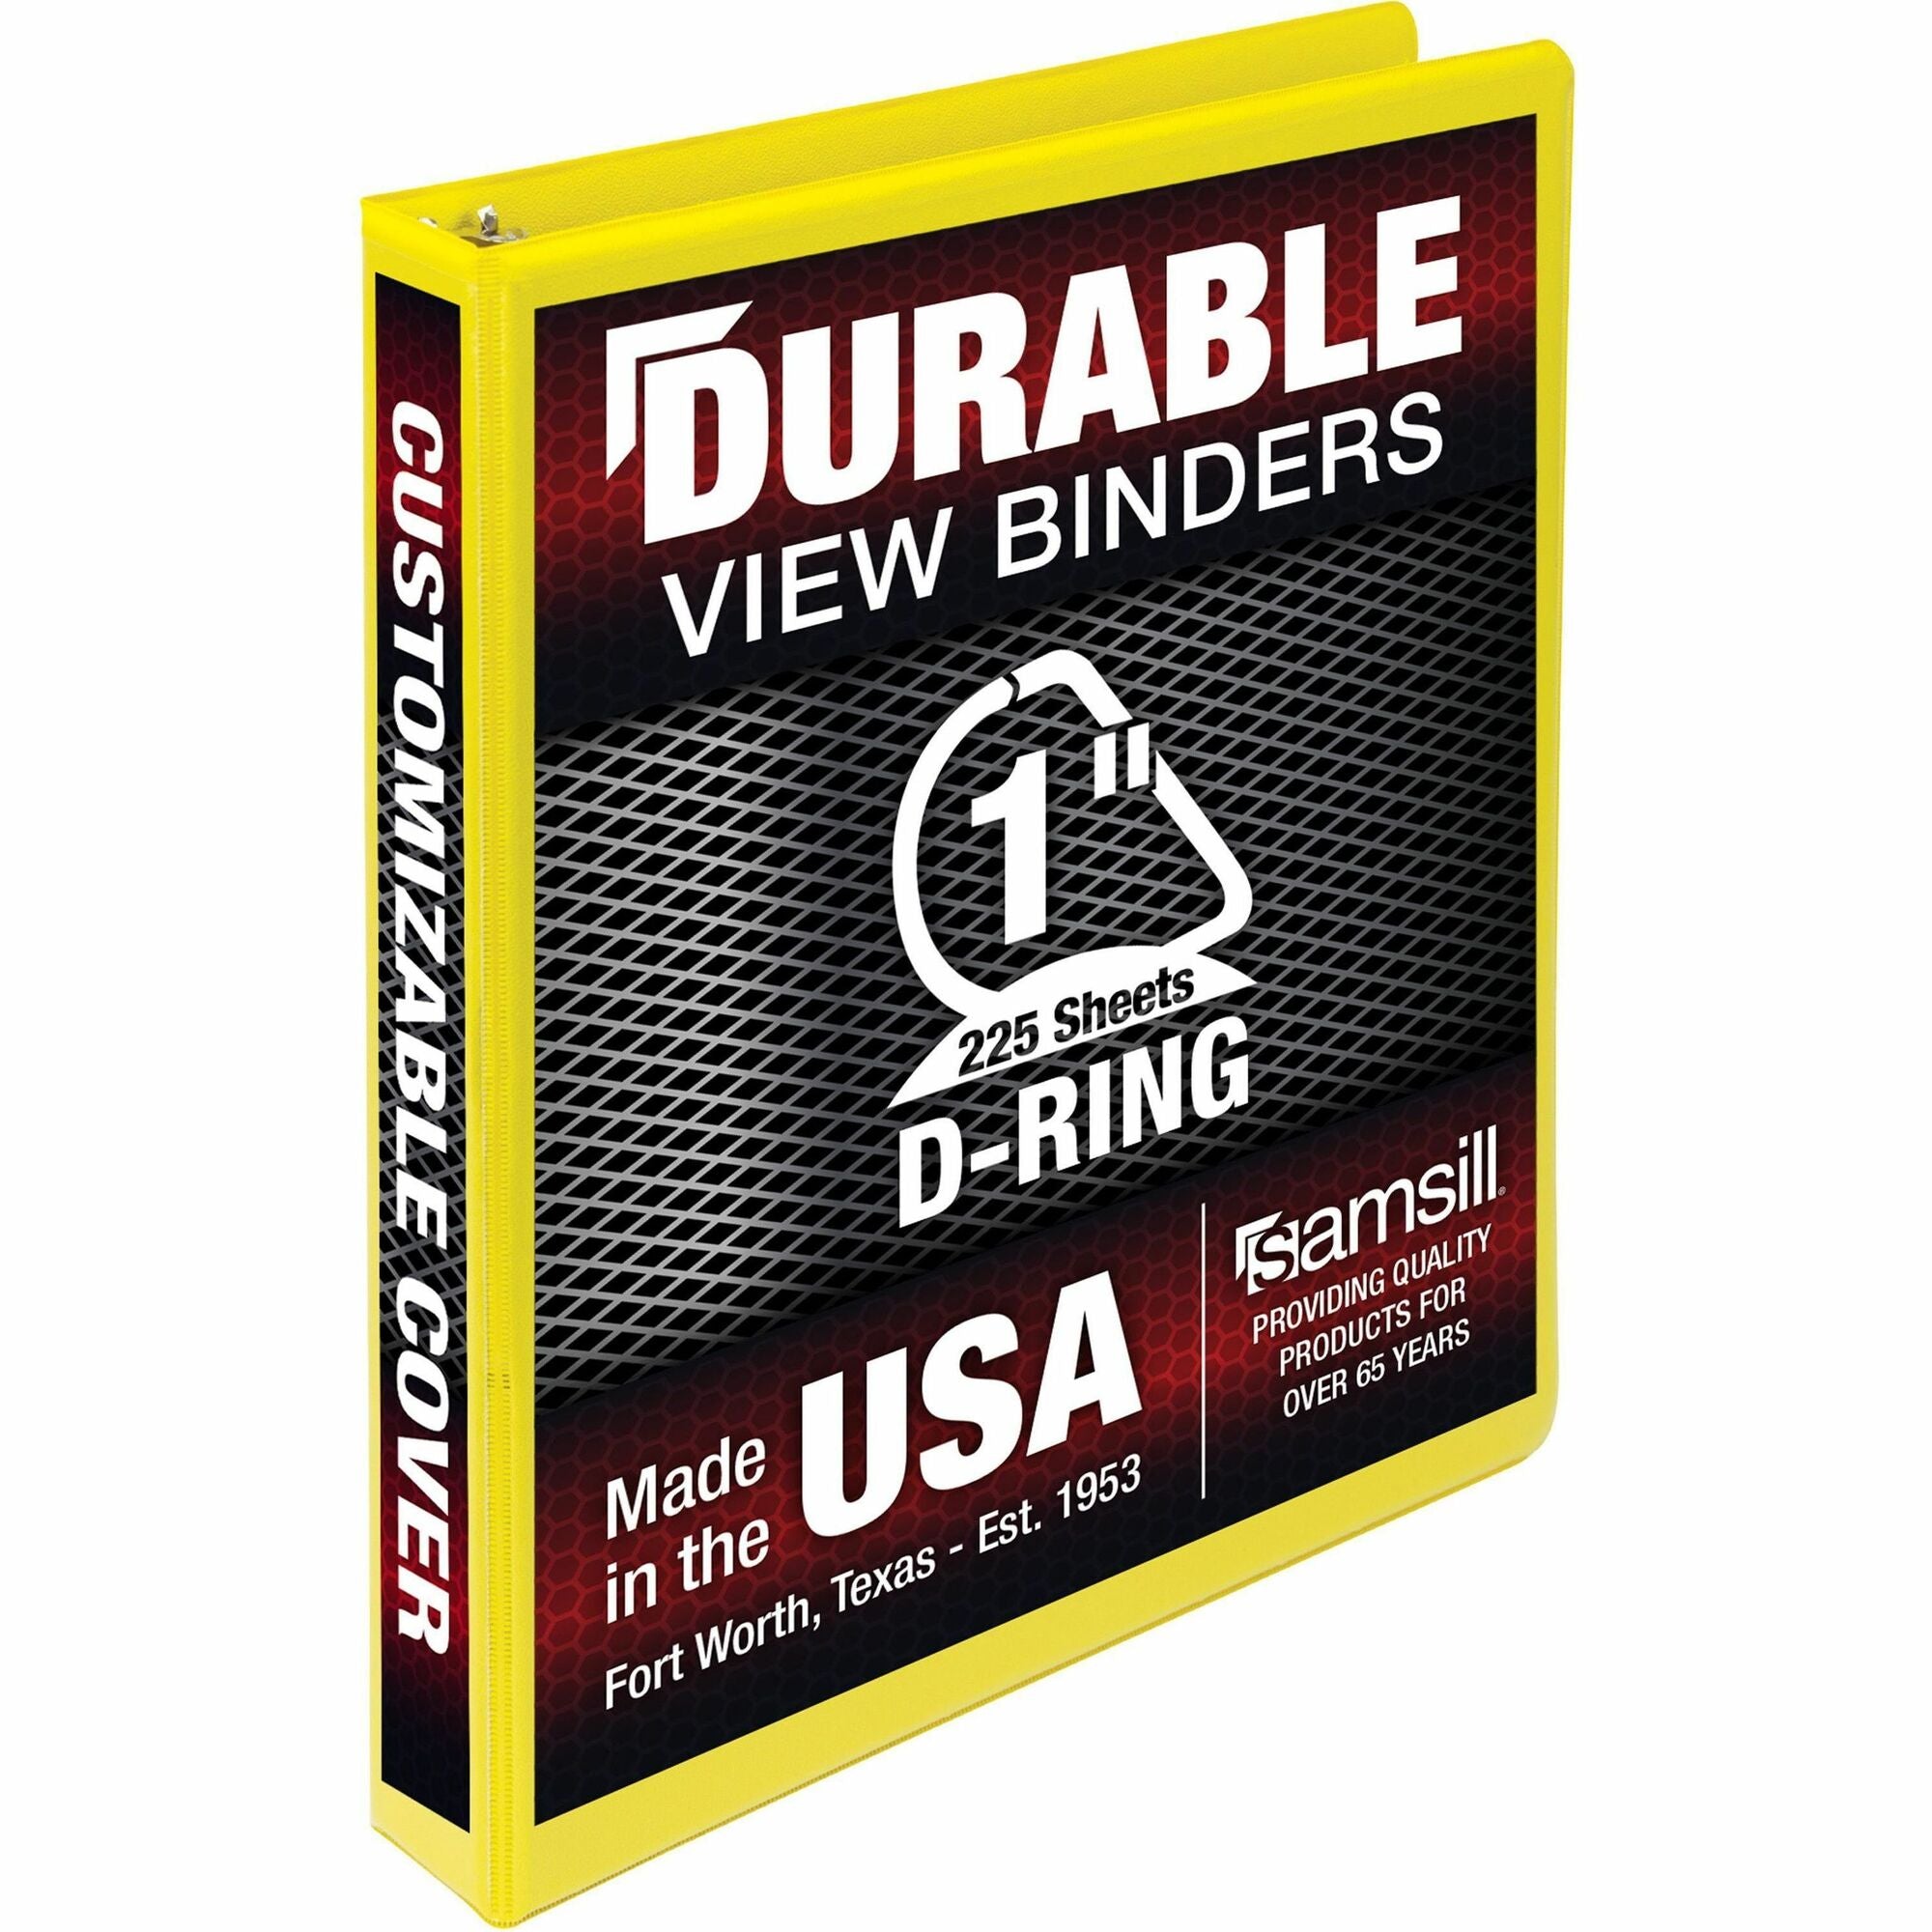 Samsill Durable Three-Ring View Binder - 1" Binder Capacity - 225 Sheet Capacity - 3 x D-Ring Fastener(s) - 2 Internal Pocket(s) - Polypropylene, Chipboard - Yellow - Recycled - Durable, PVC-free, Ink-transfer Resistant, Clear Overlay, Sturdy - 1 Eac